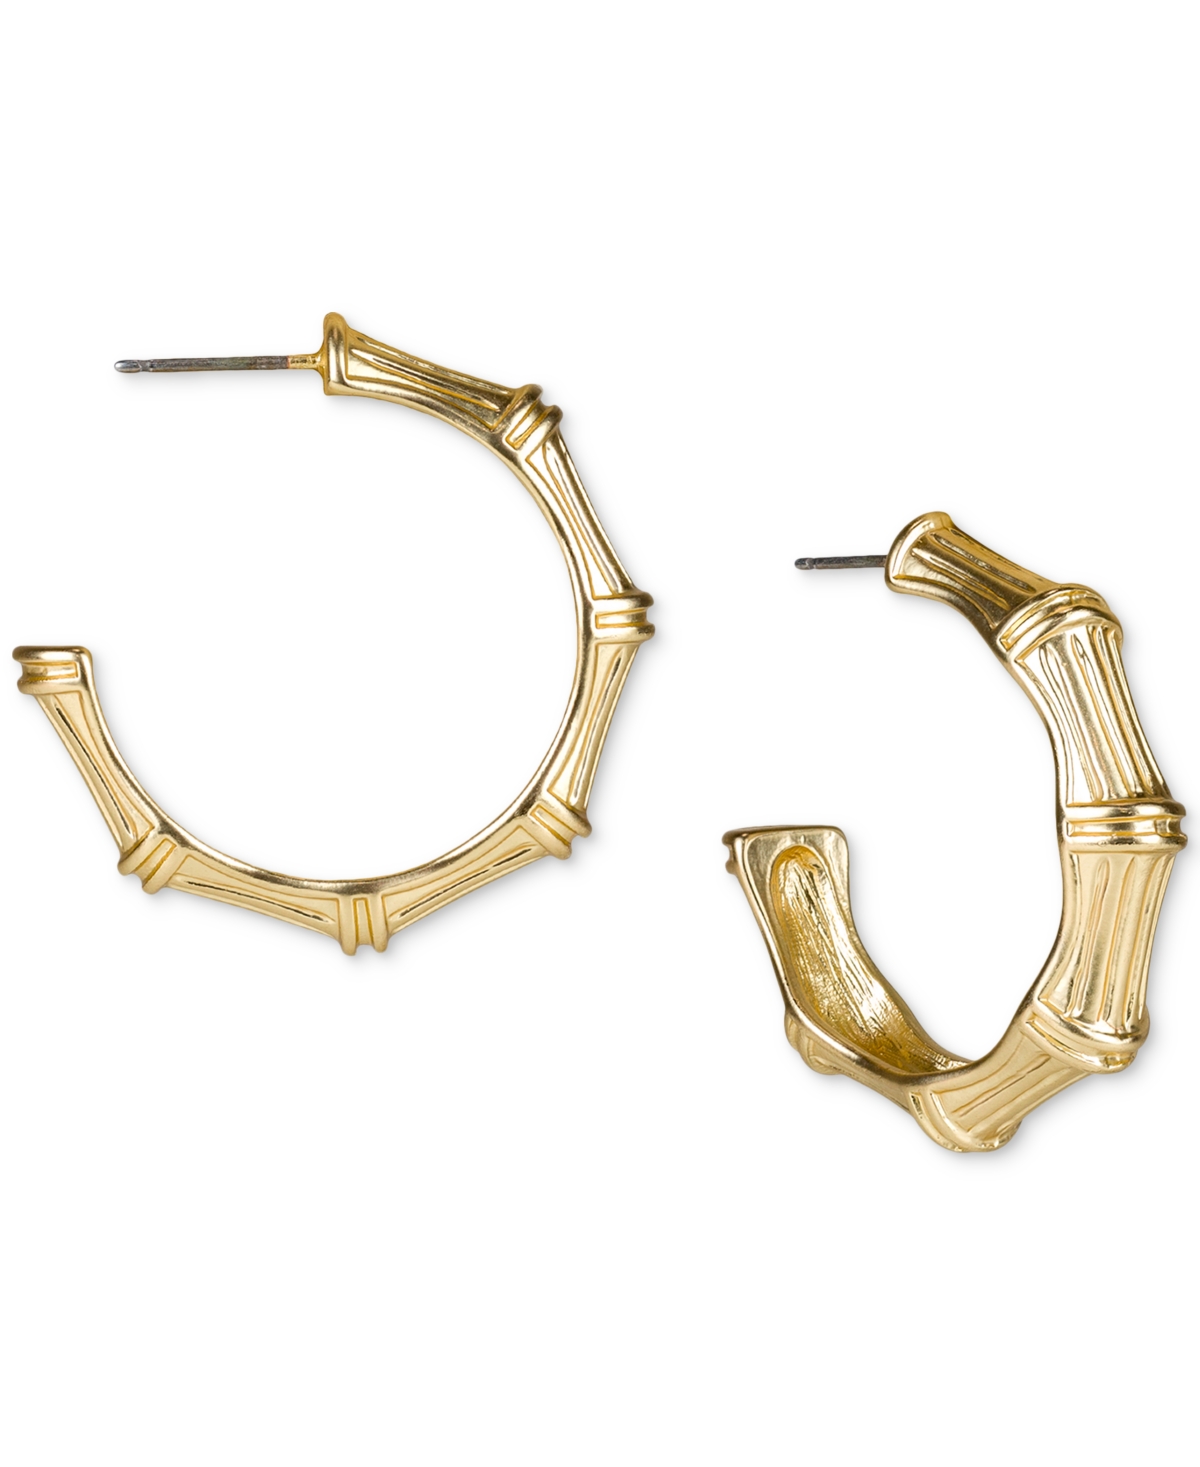 Gold-Tone Small Bamboo-Style C-Hoop Earrings, 1" - Egyptian G